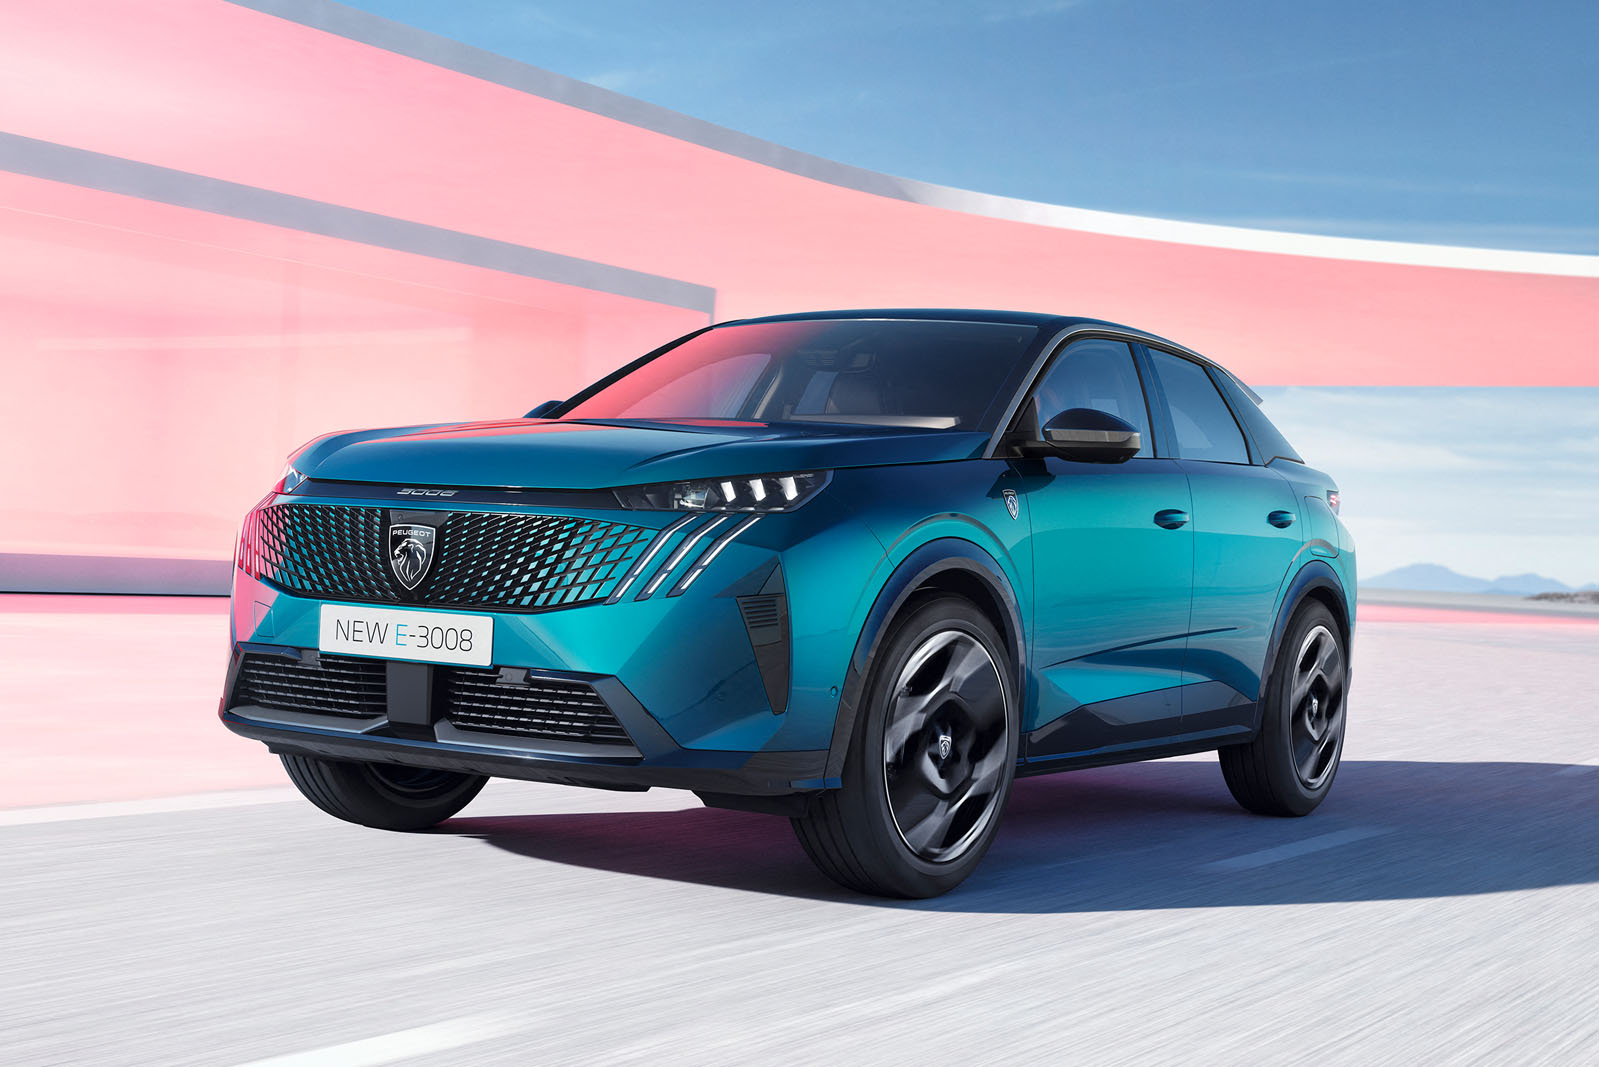 Peugeot 5008 SUV gets a bold new look